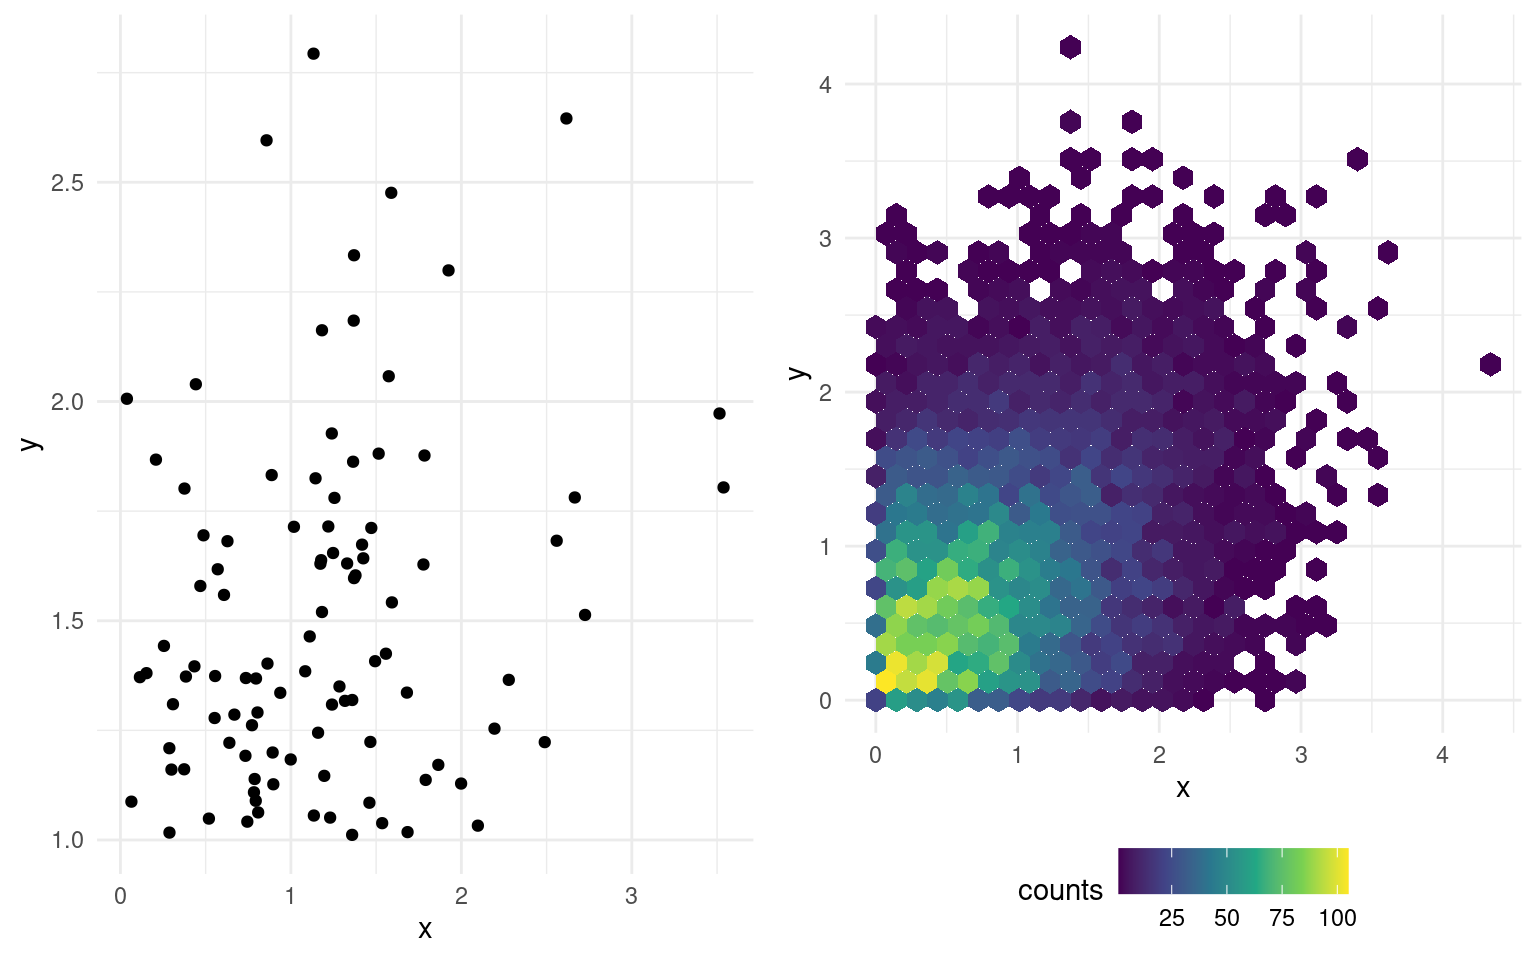 Scatterplot (left) and hexagonal heatmap of bidimensional bin counts (right) of simulated data.